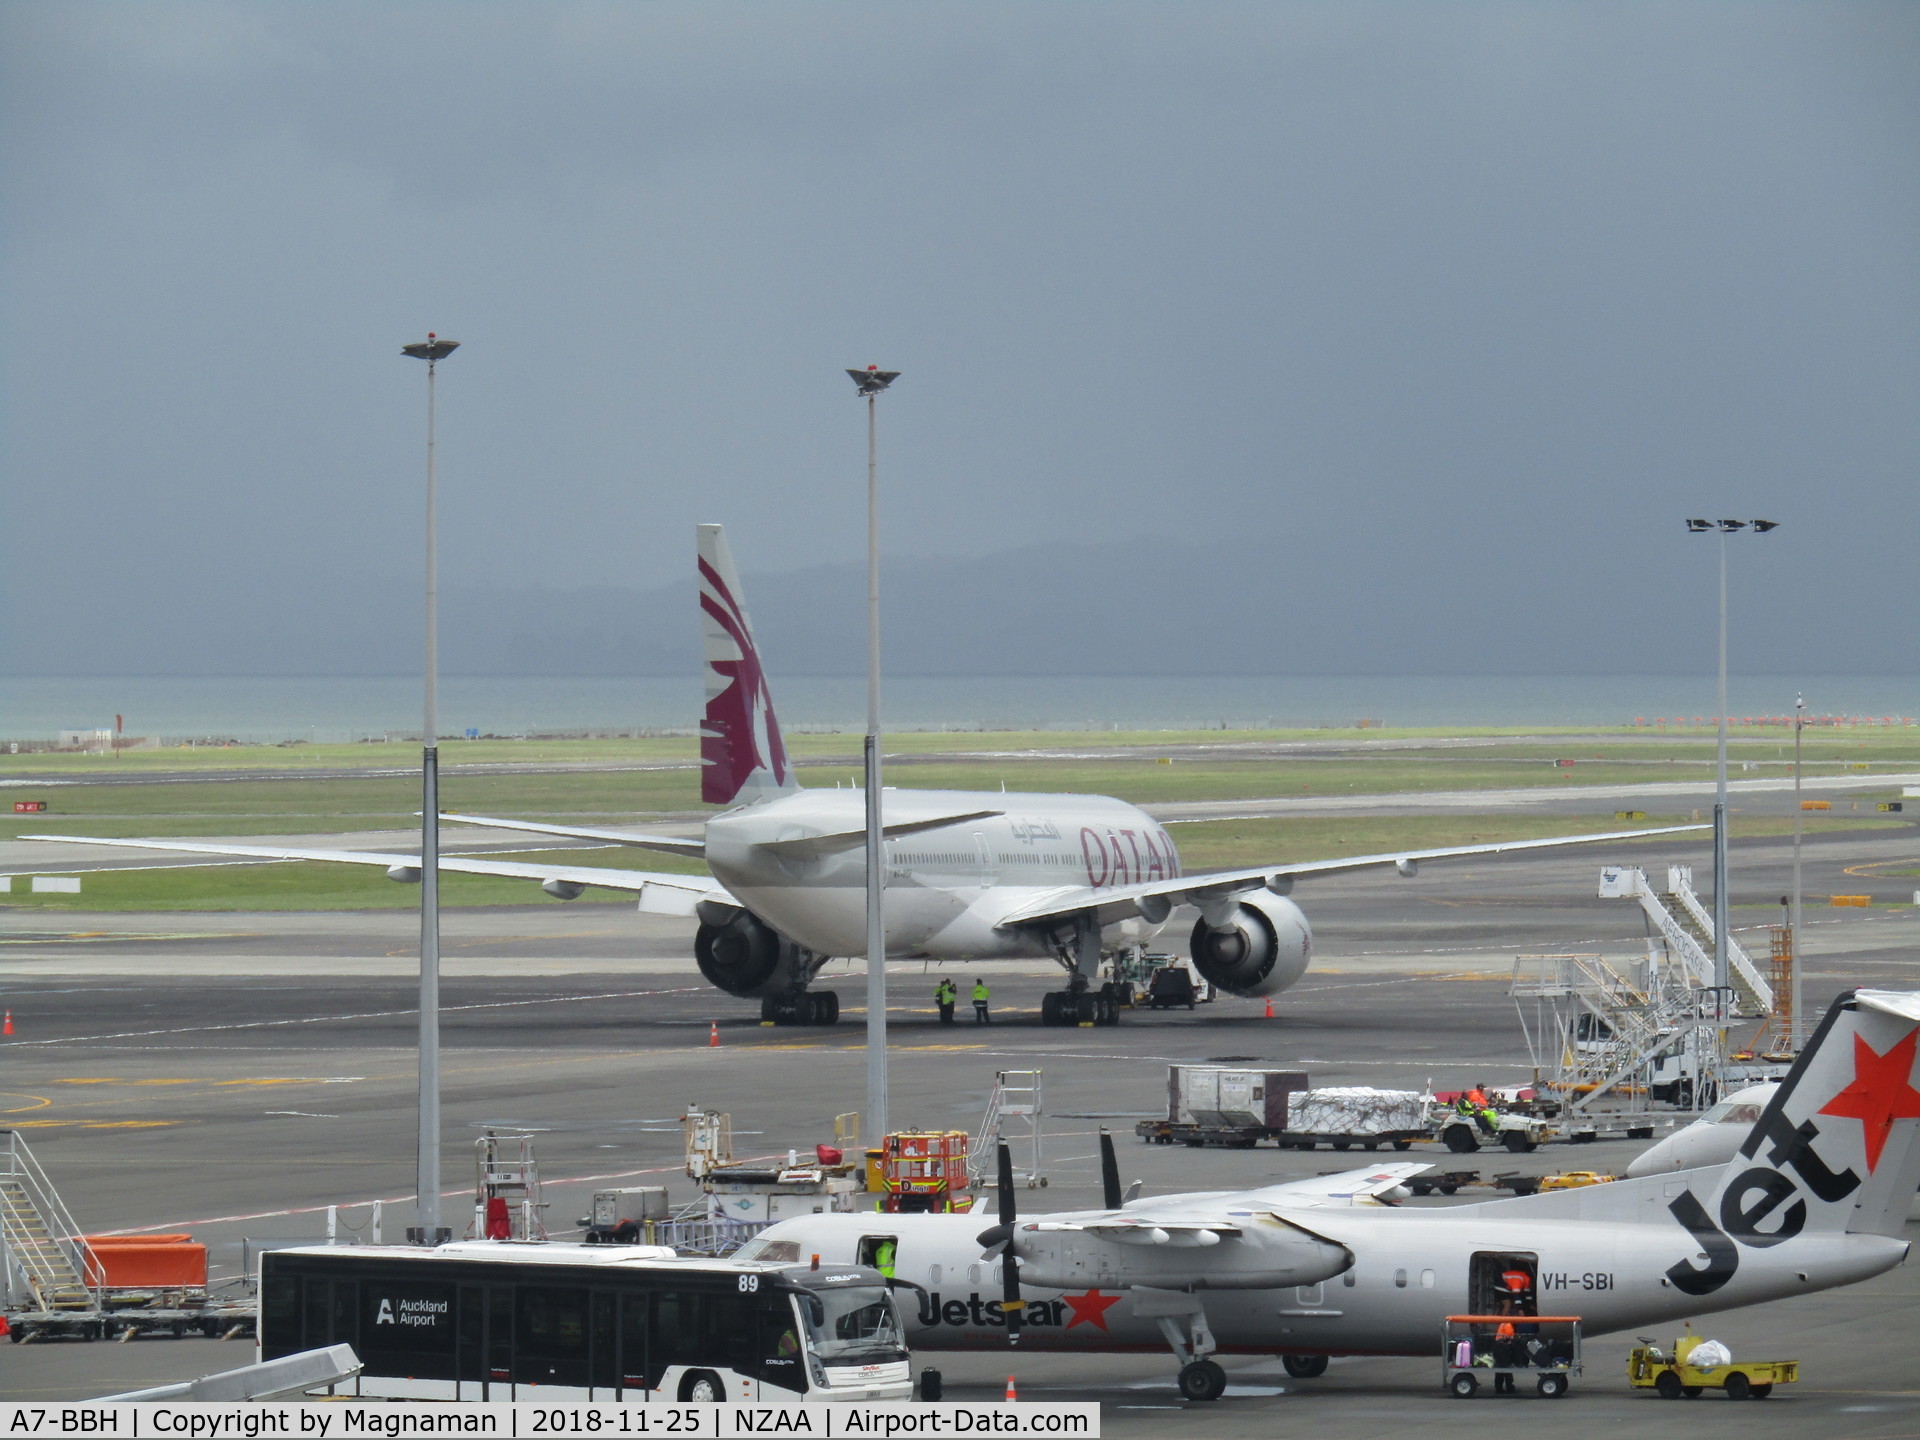 A7-BBH, 2010 Boeing 777-2DZ/LR C/N 36102, ON REMOTE STAND AT AKL